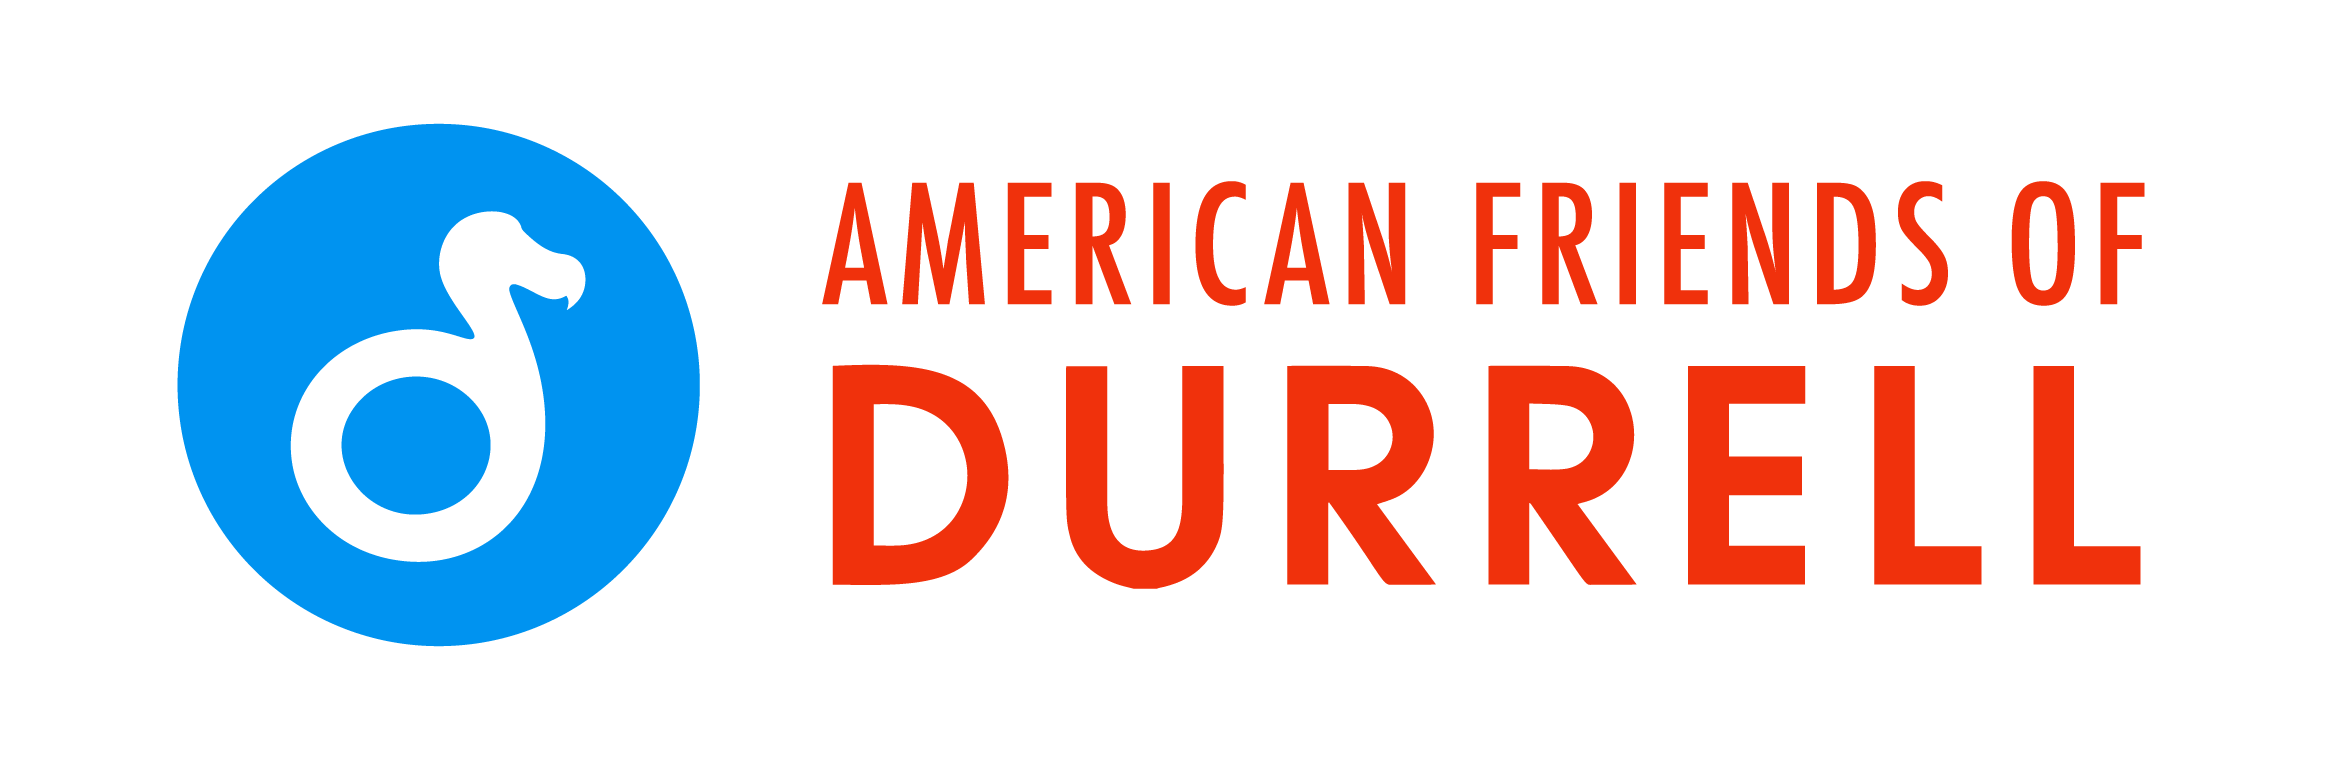 American Friends of Durrell